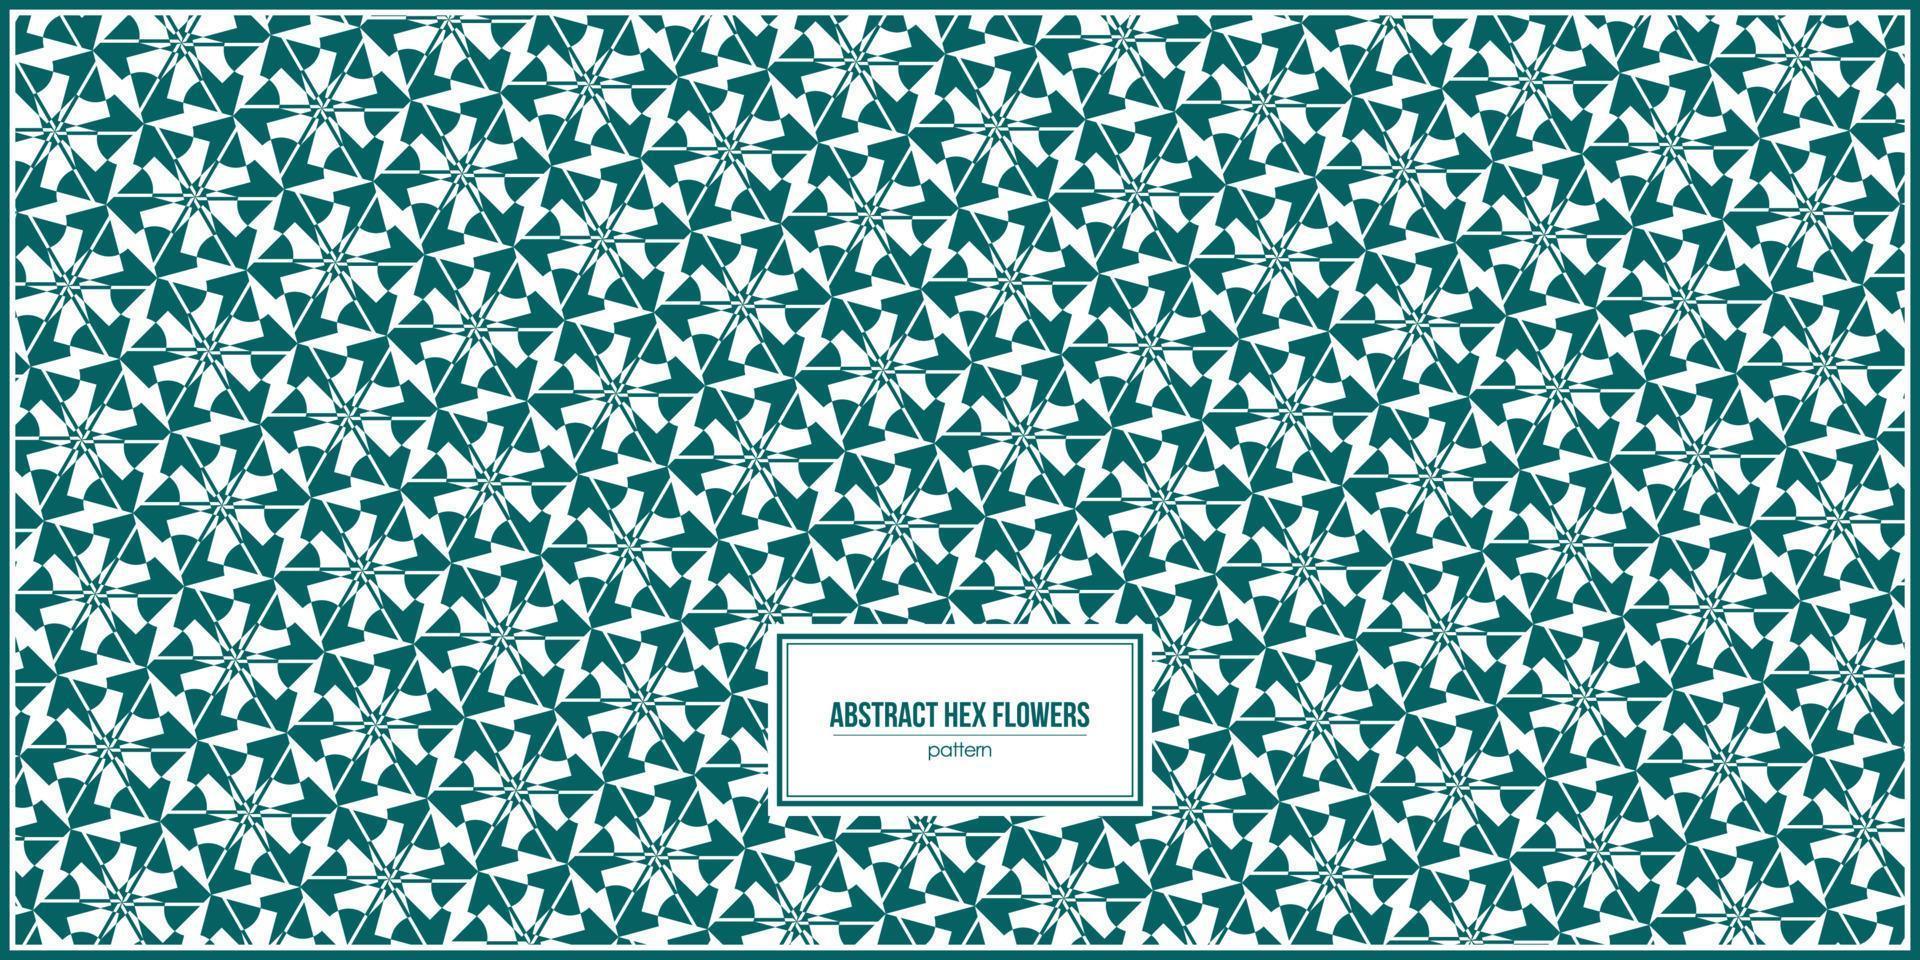 abstract hex flower pattern with symmetrical shape vector